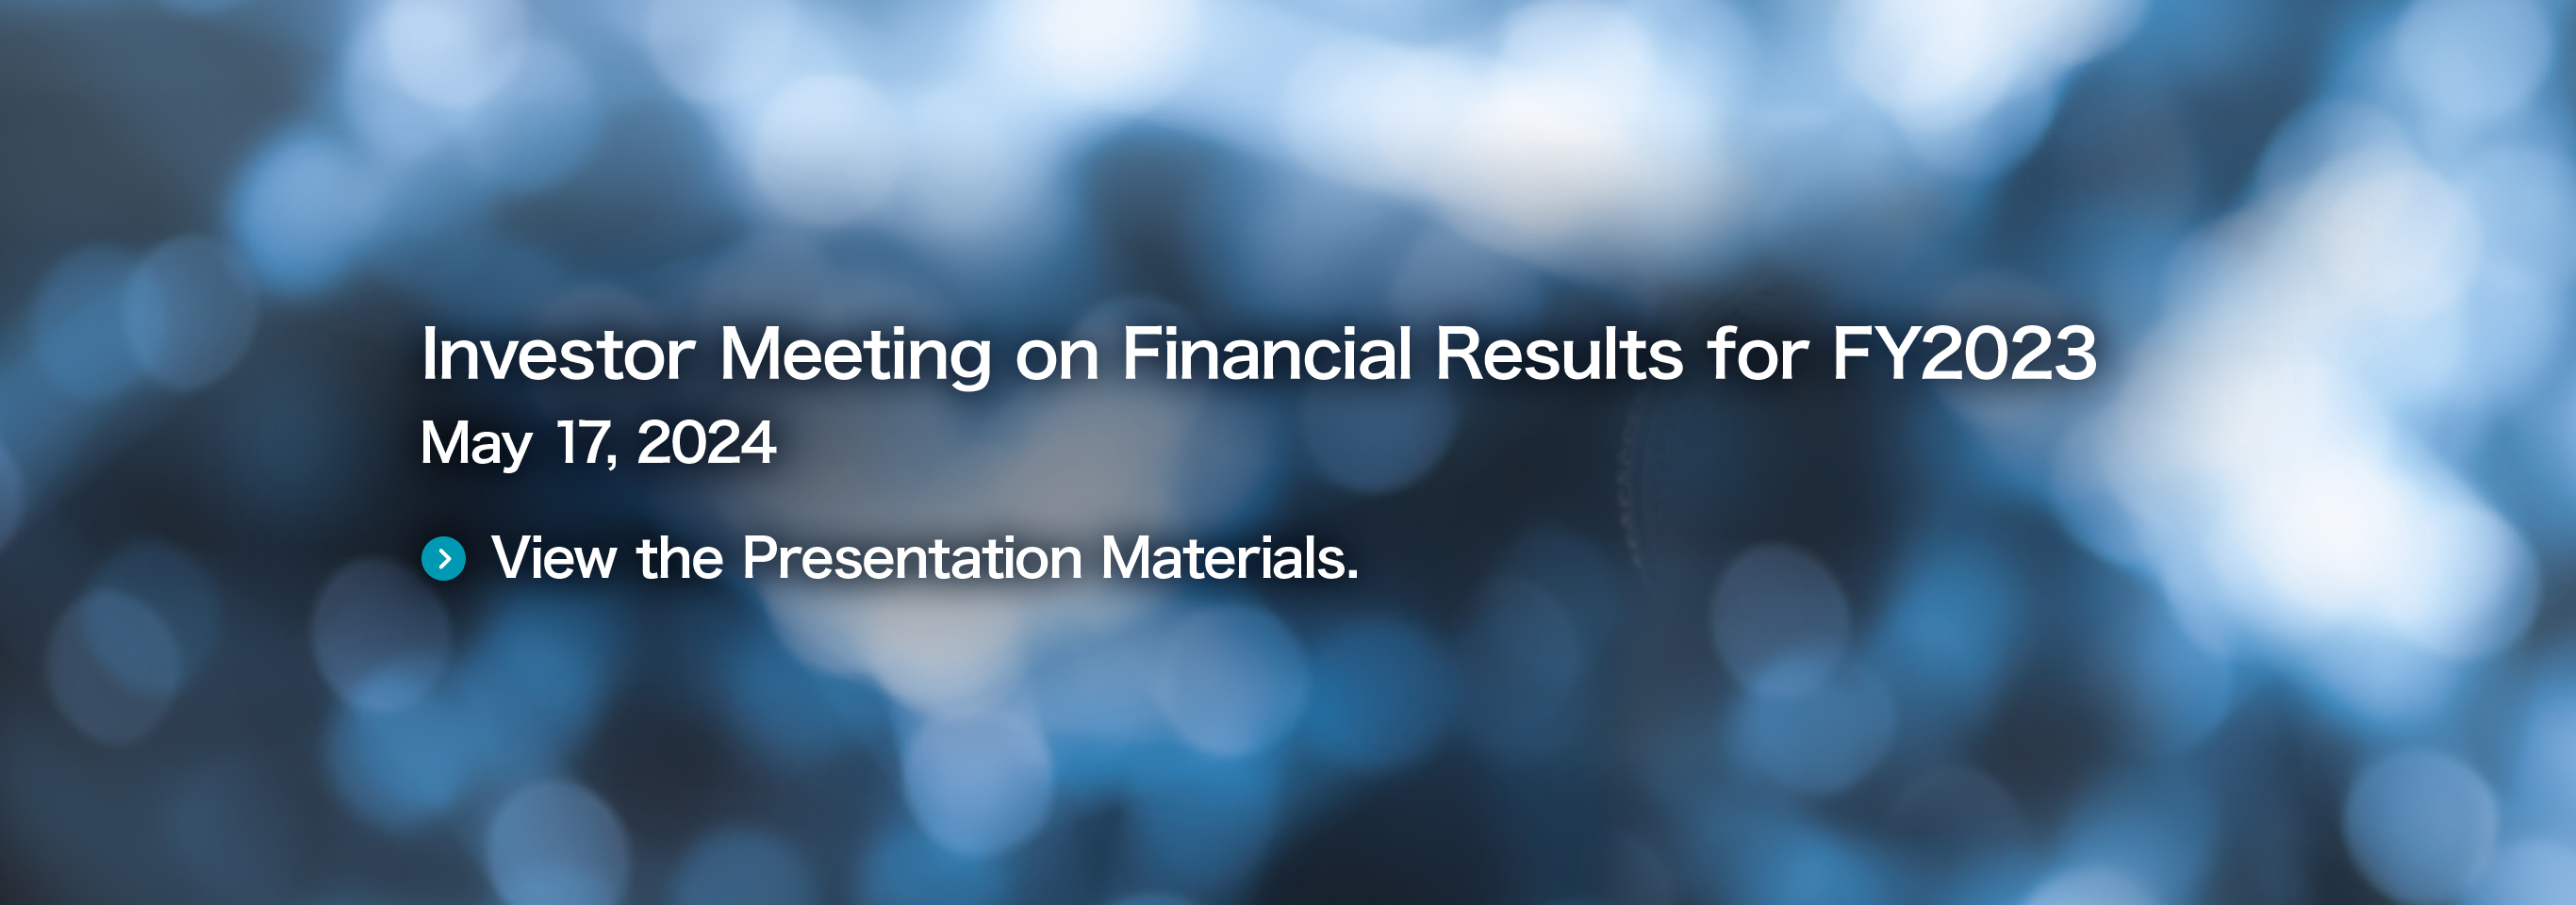 Financial Results for 3QFY2023 January 31, 2024 View the Financial Results.